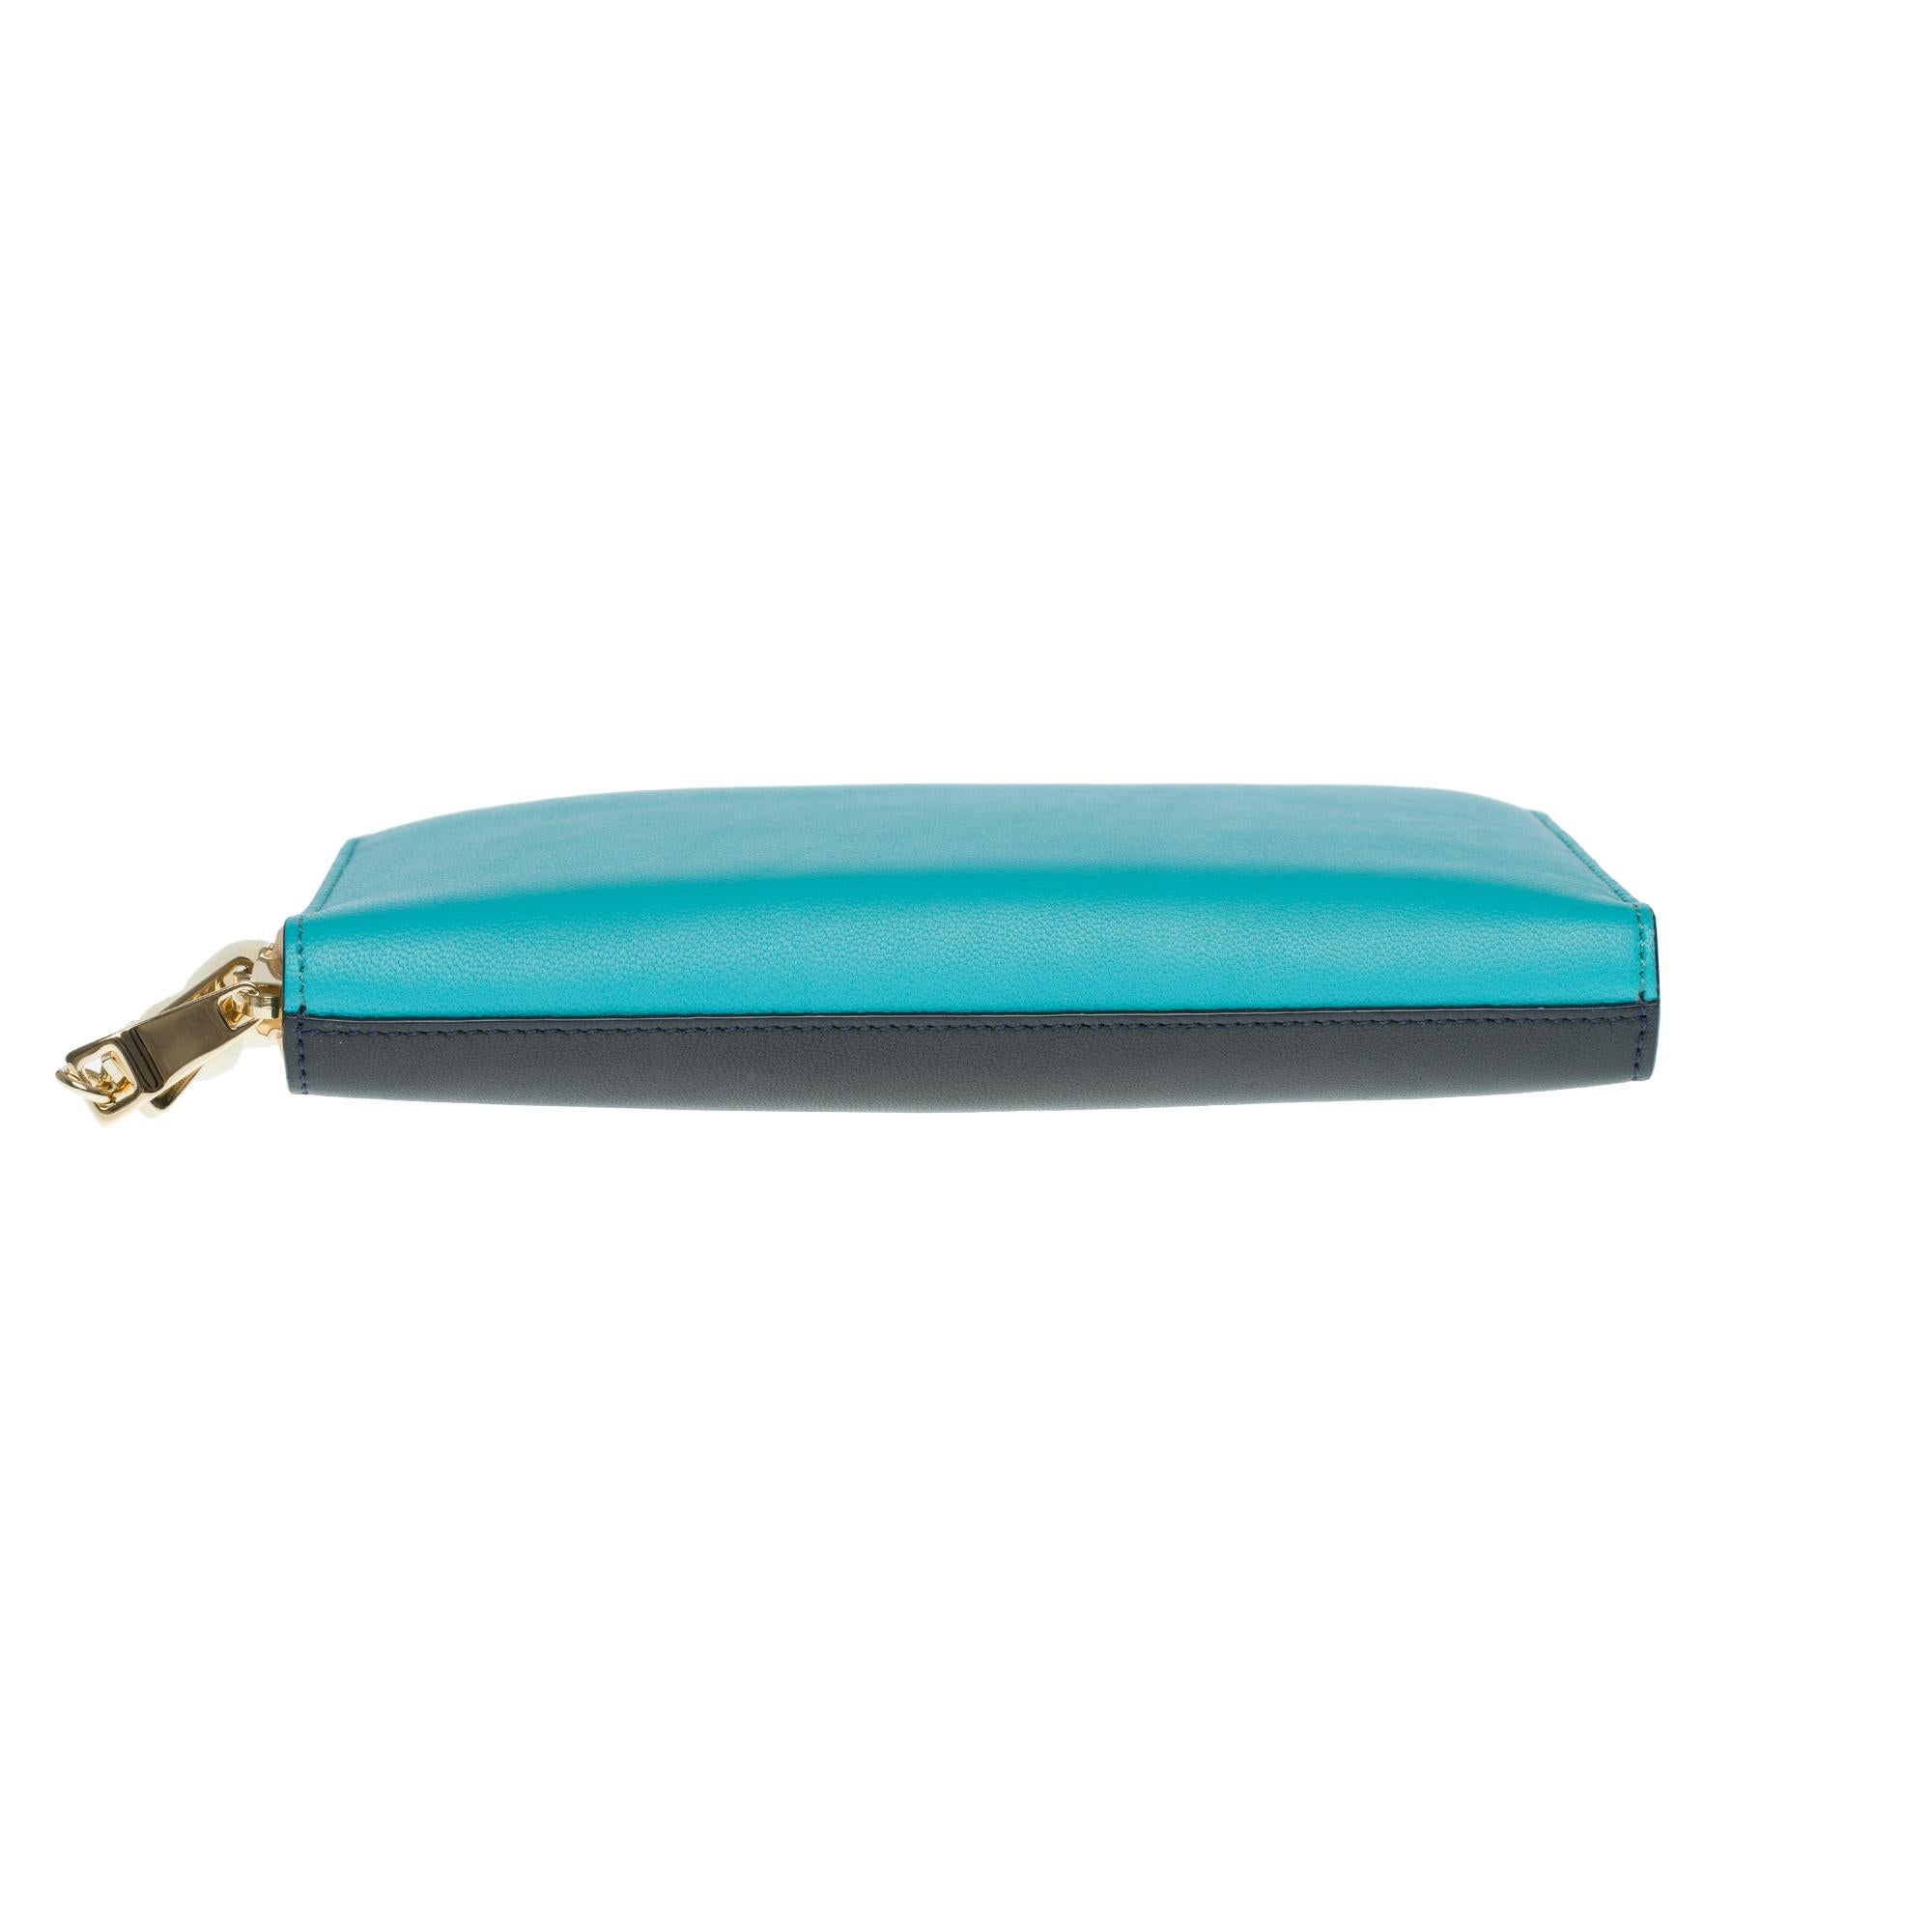 Charming Chloé bicolor wallet in turquoise and black leather with gold hardware 4